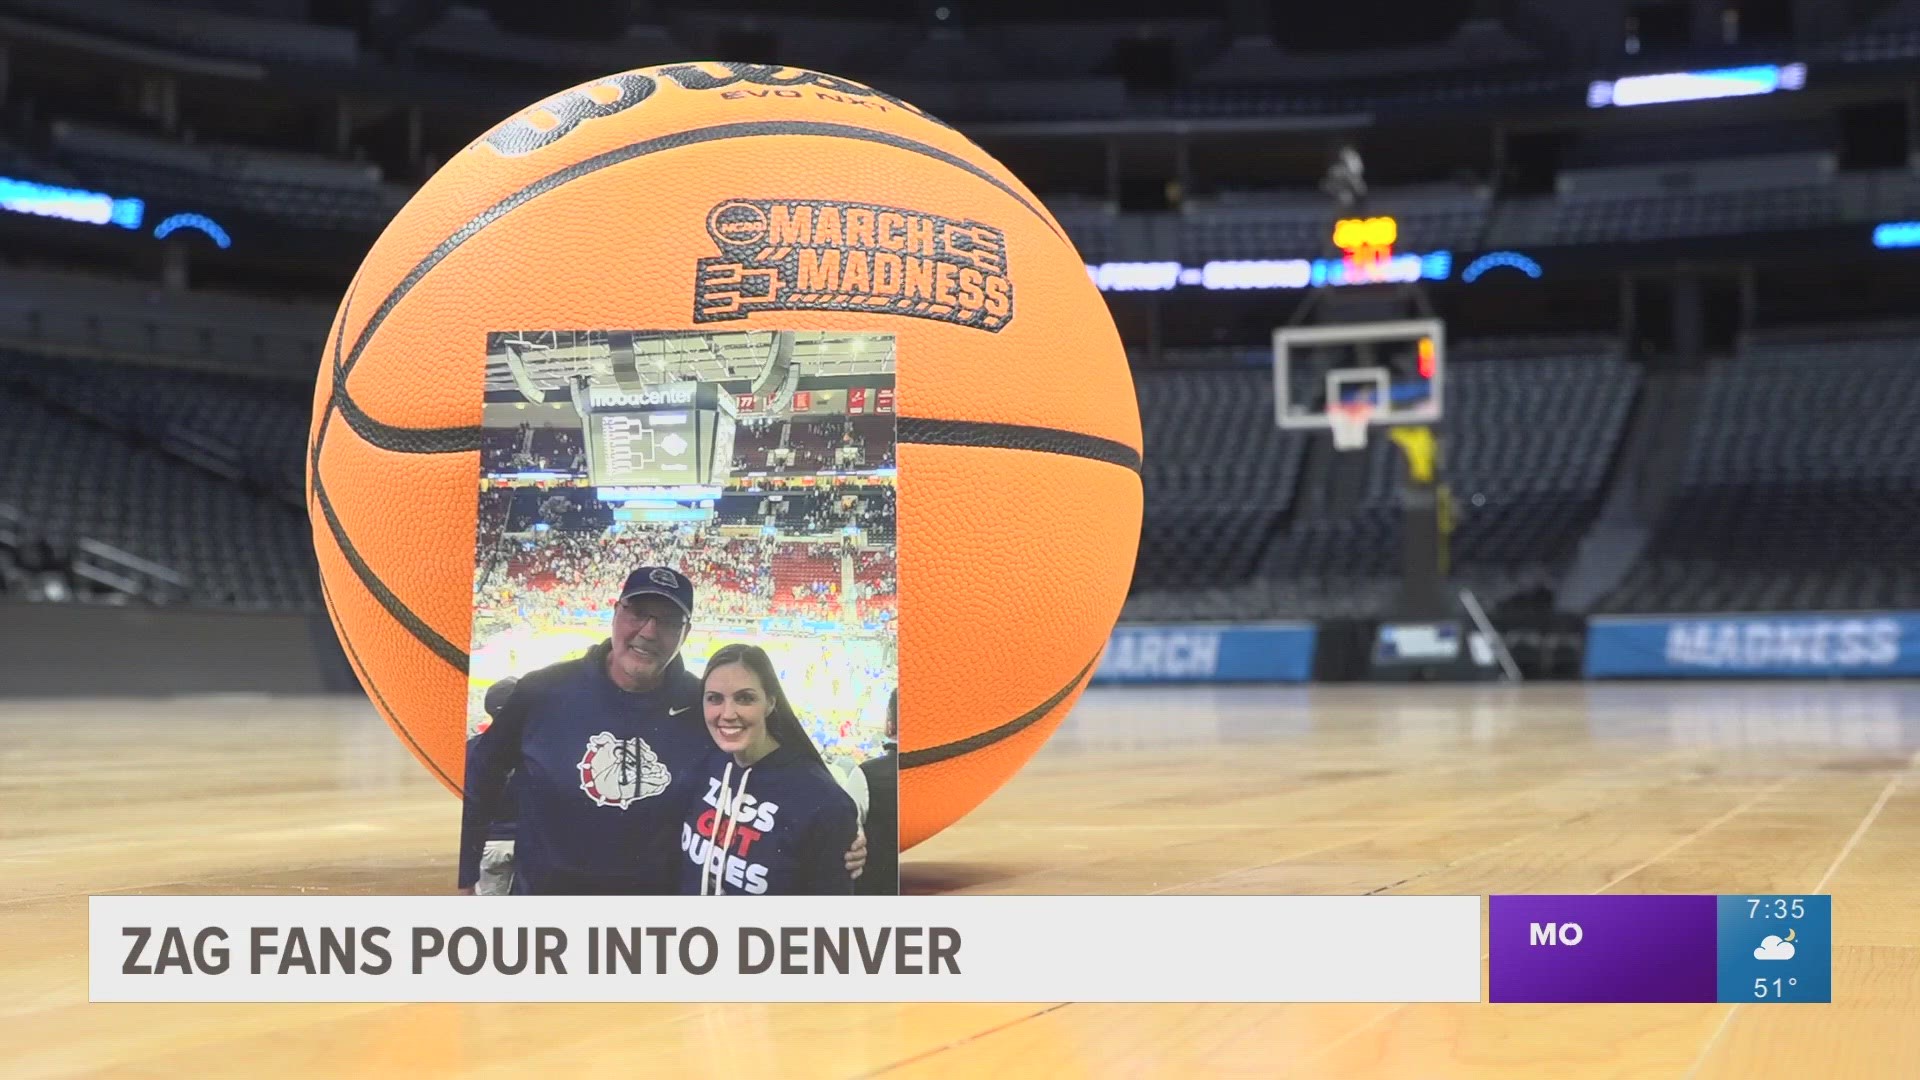 Diana and Guy Berger have been traveling to Gonzaga's March Madness runs since 2013. This year the pair had an extra fan tag along.